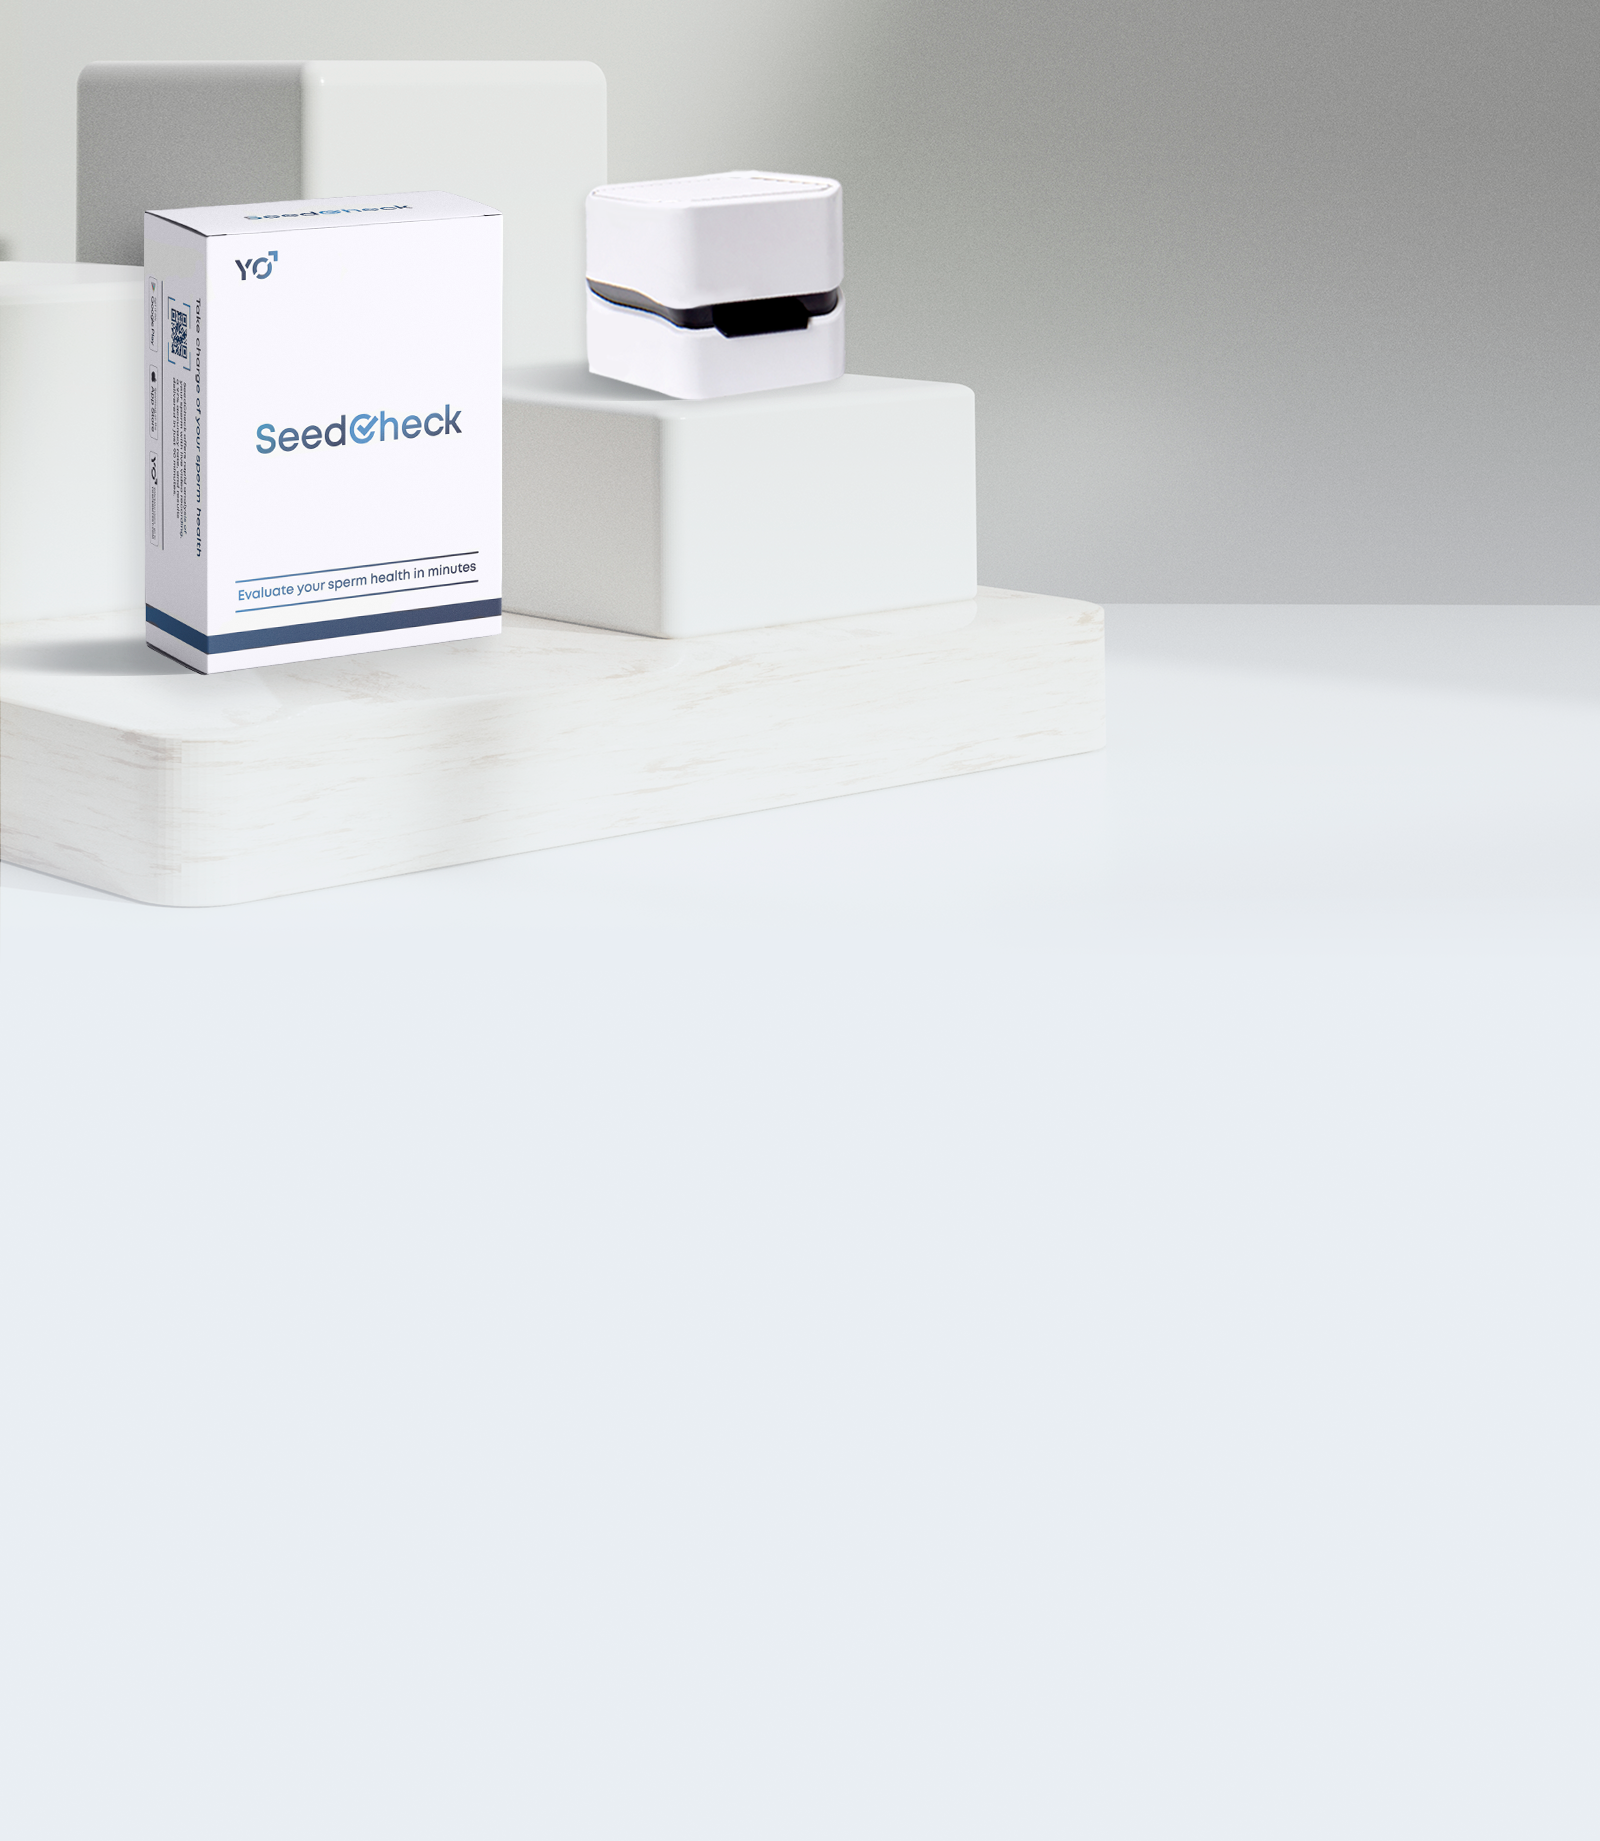 SeedCheck male fertility test kit and device on a modern white display